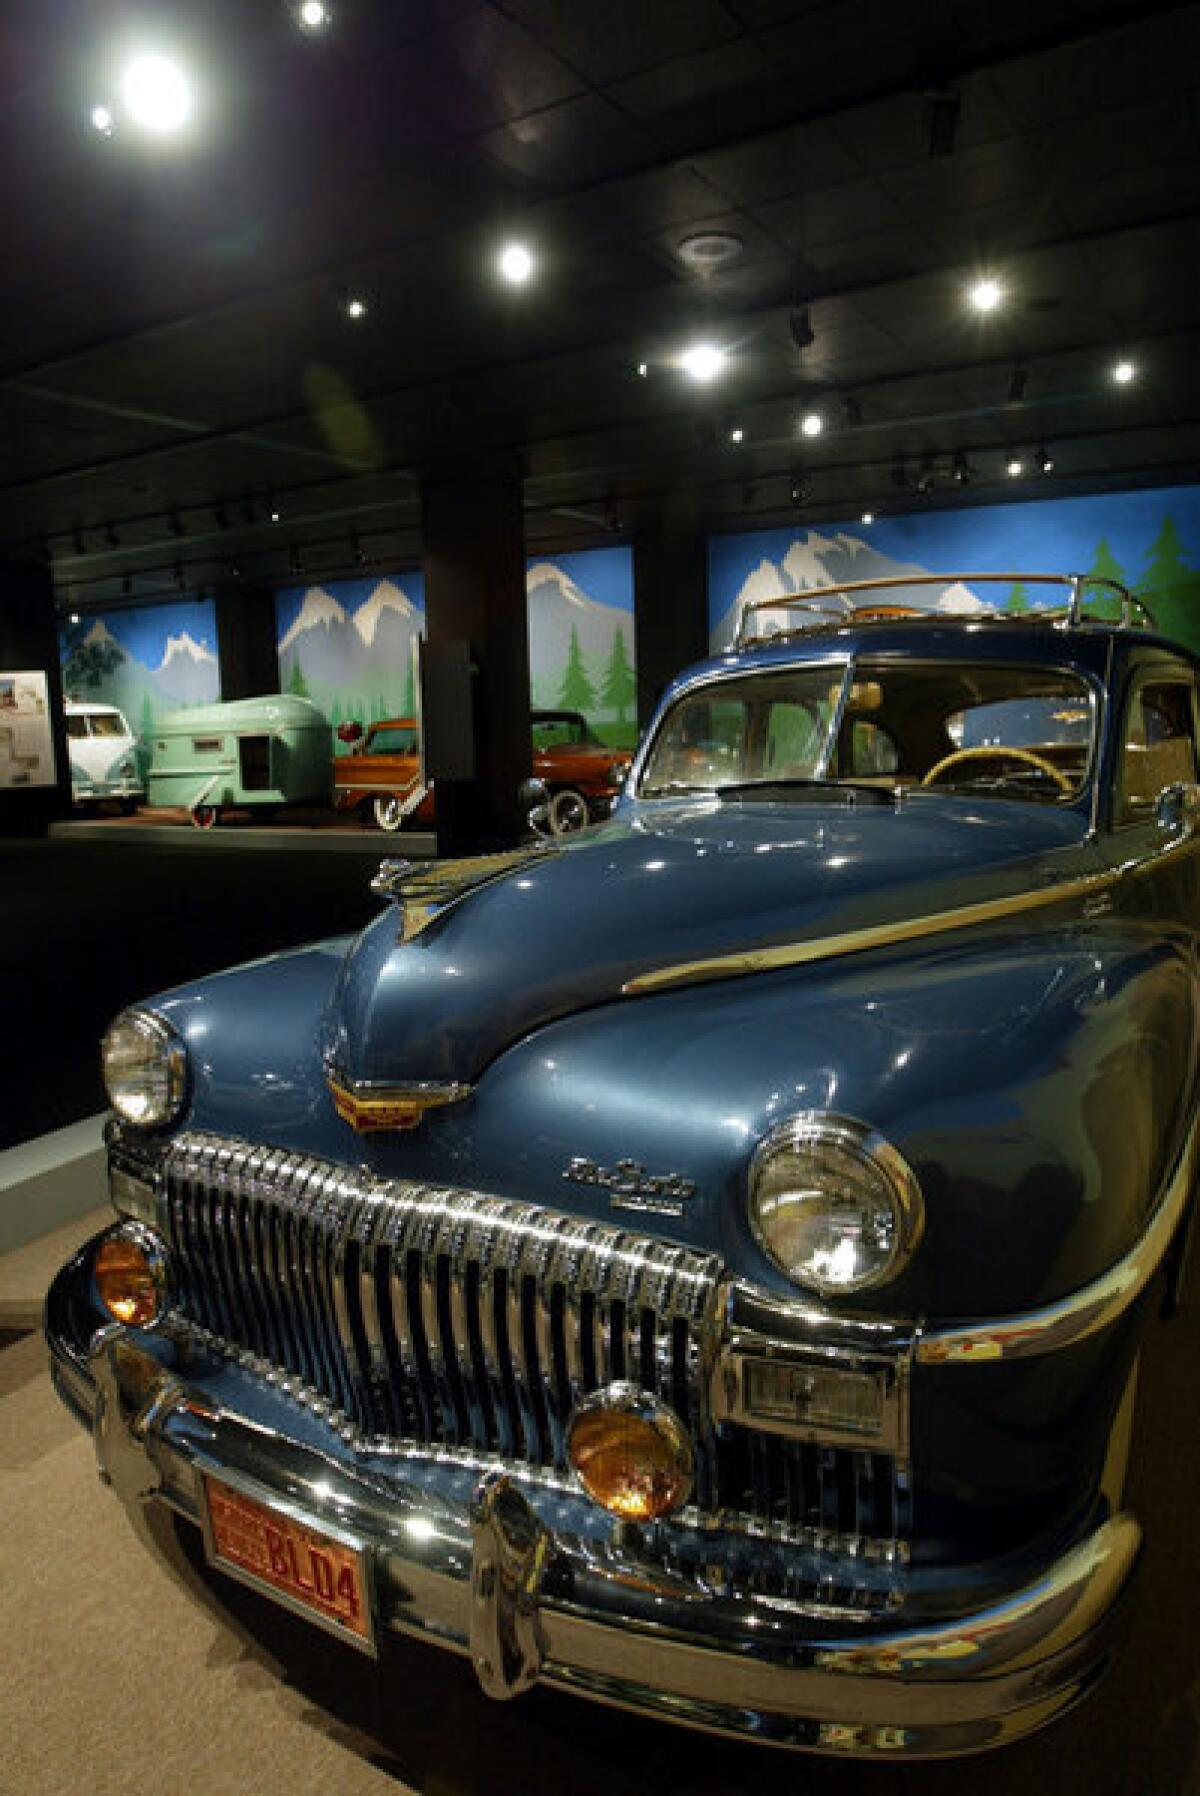 The Peterson Automotive Museum in 2004 featured this 1948 De Soto Suburban in a display of distinct cars and trailers that Americans would use on vacations.